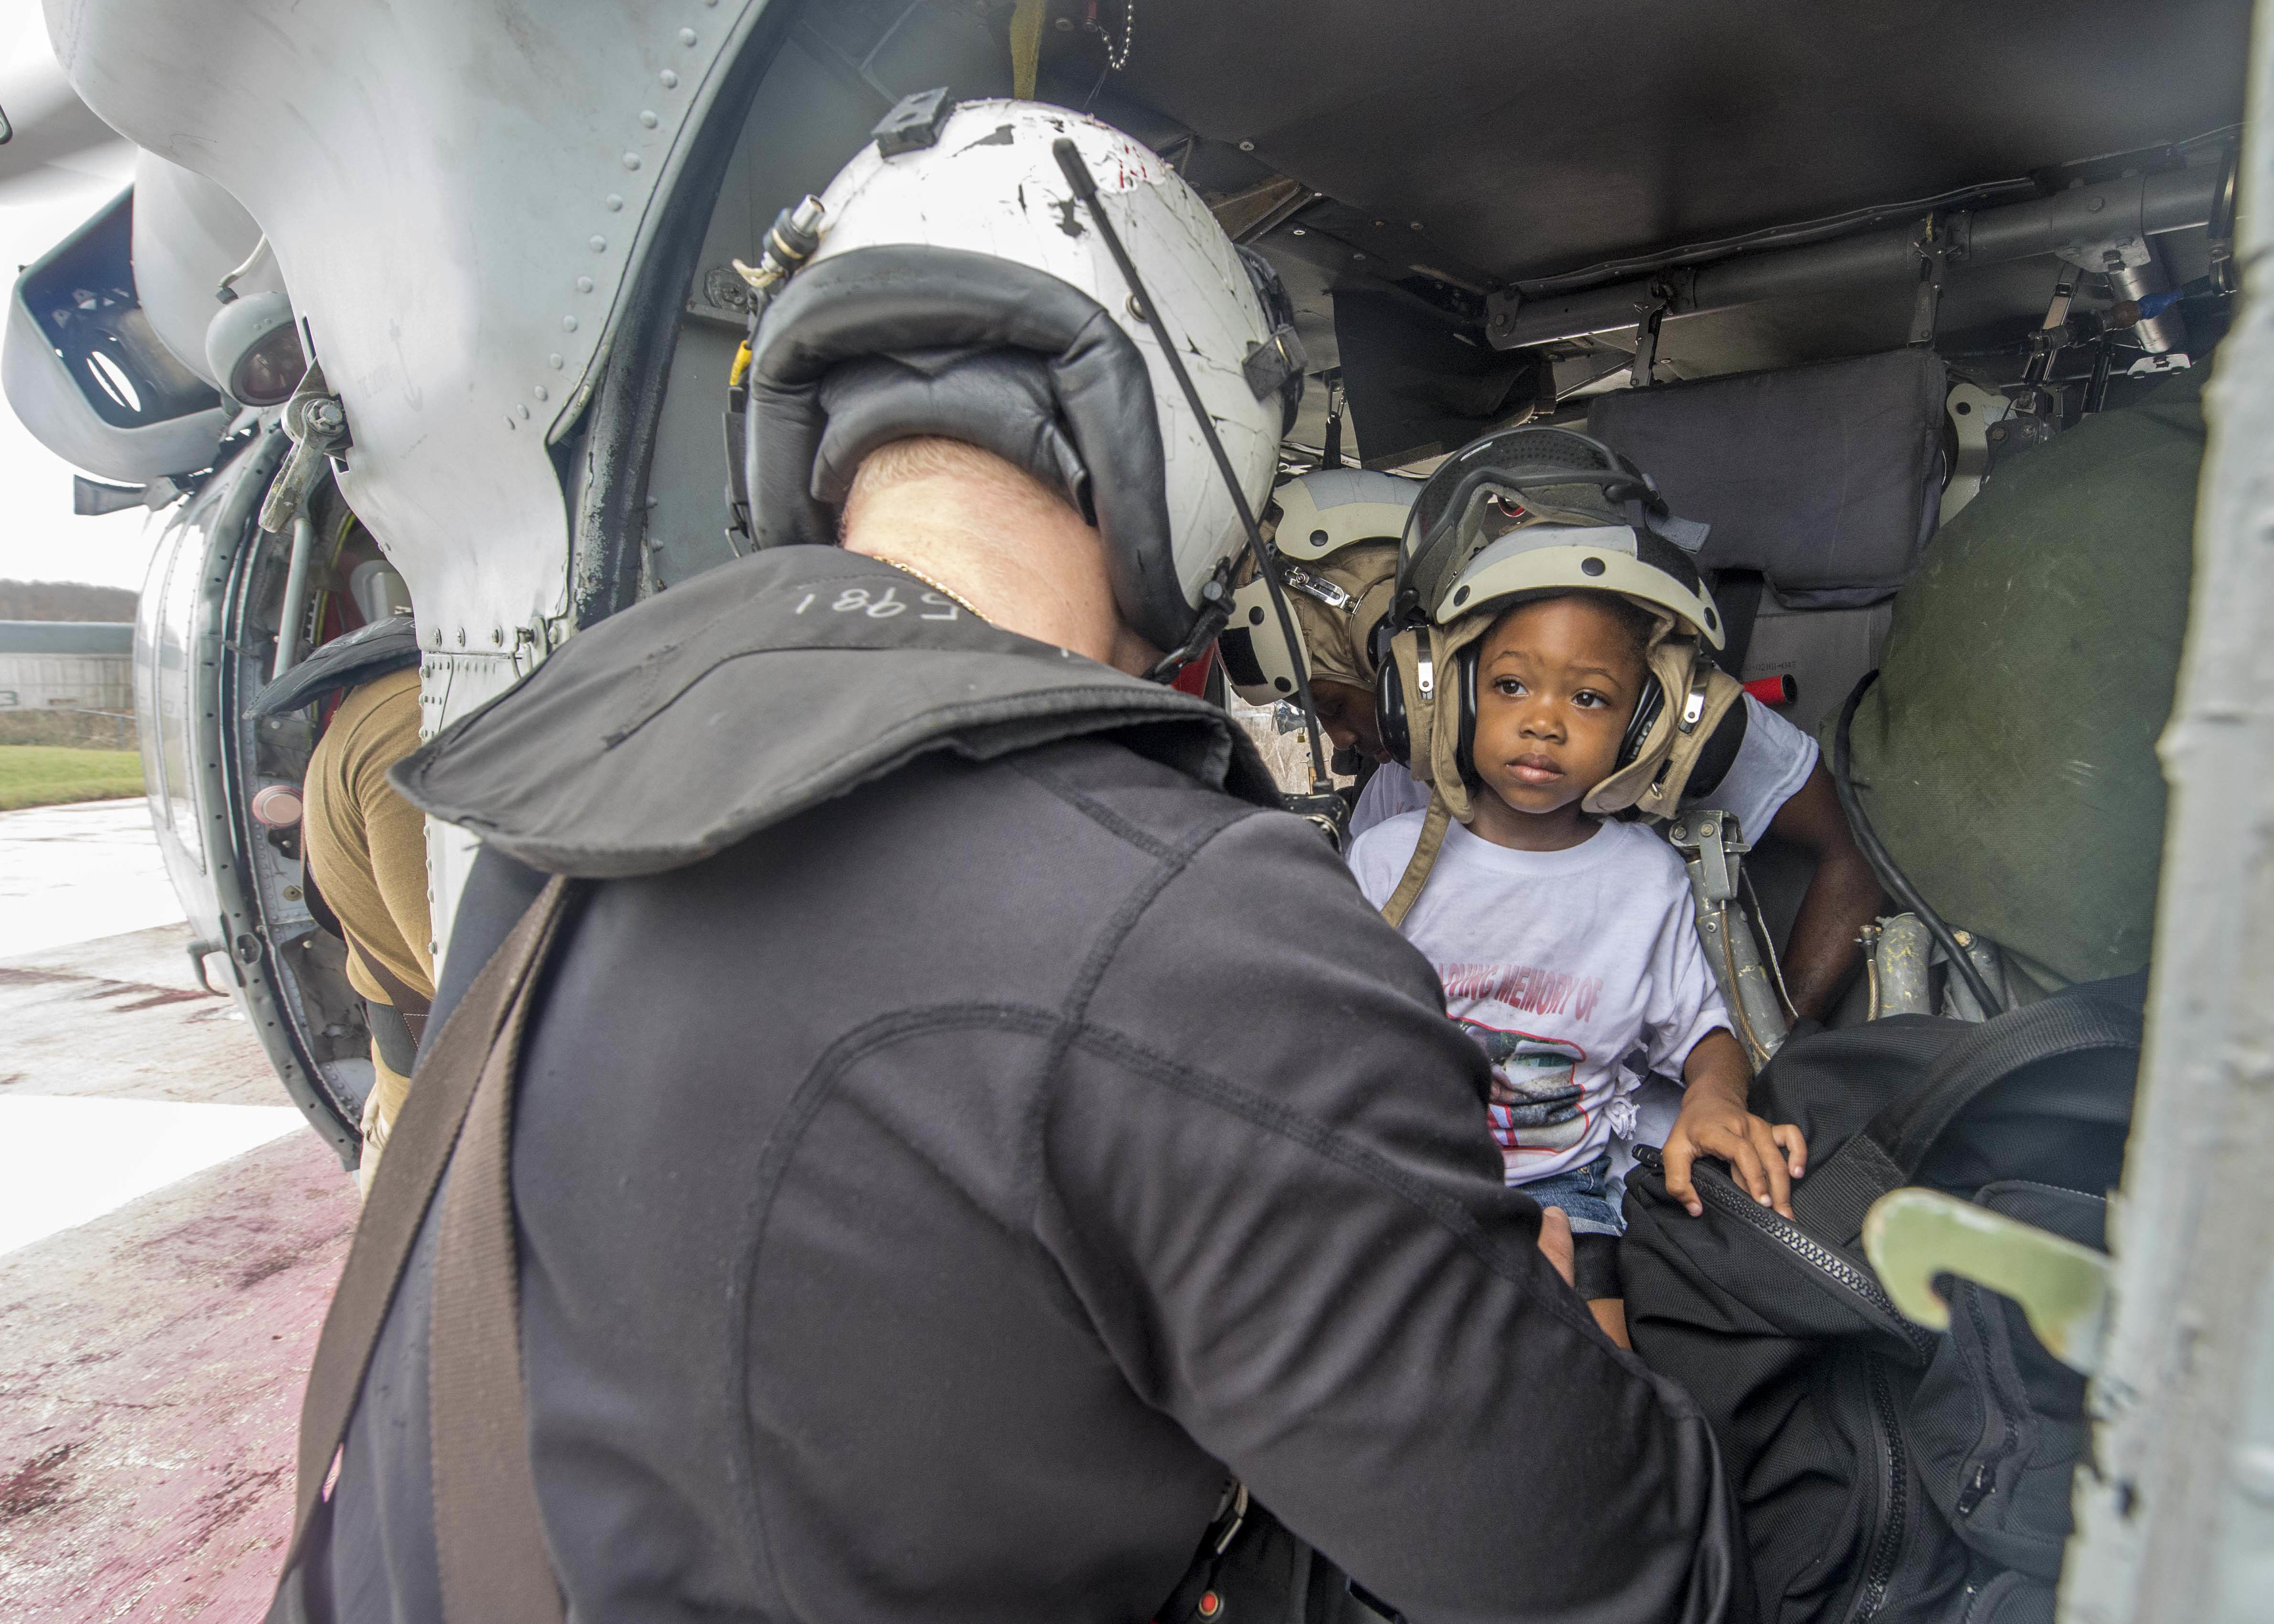 Naval Aircrewman (Helicopter) 2nd Class Logan Parkinson, assigned to Helicopter Sea Combat Squadron (HSC) 22, prepares a patient's family for evacuation during relief efforts in the wake of Hurricane Maria in St. Croix, U.S. Virgin Islands, Sept. 21. U.S. Navy MC3 Levingston Lewis Photo